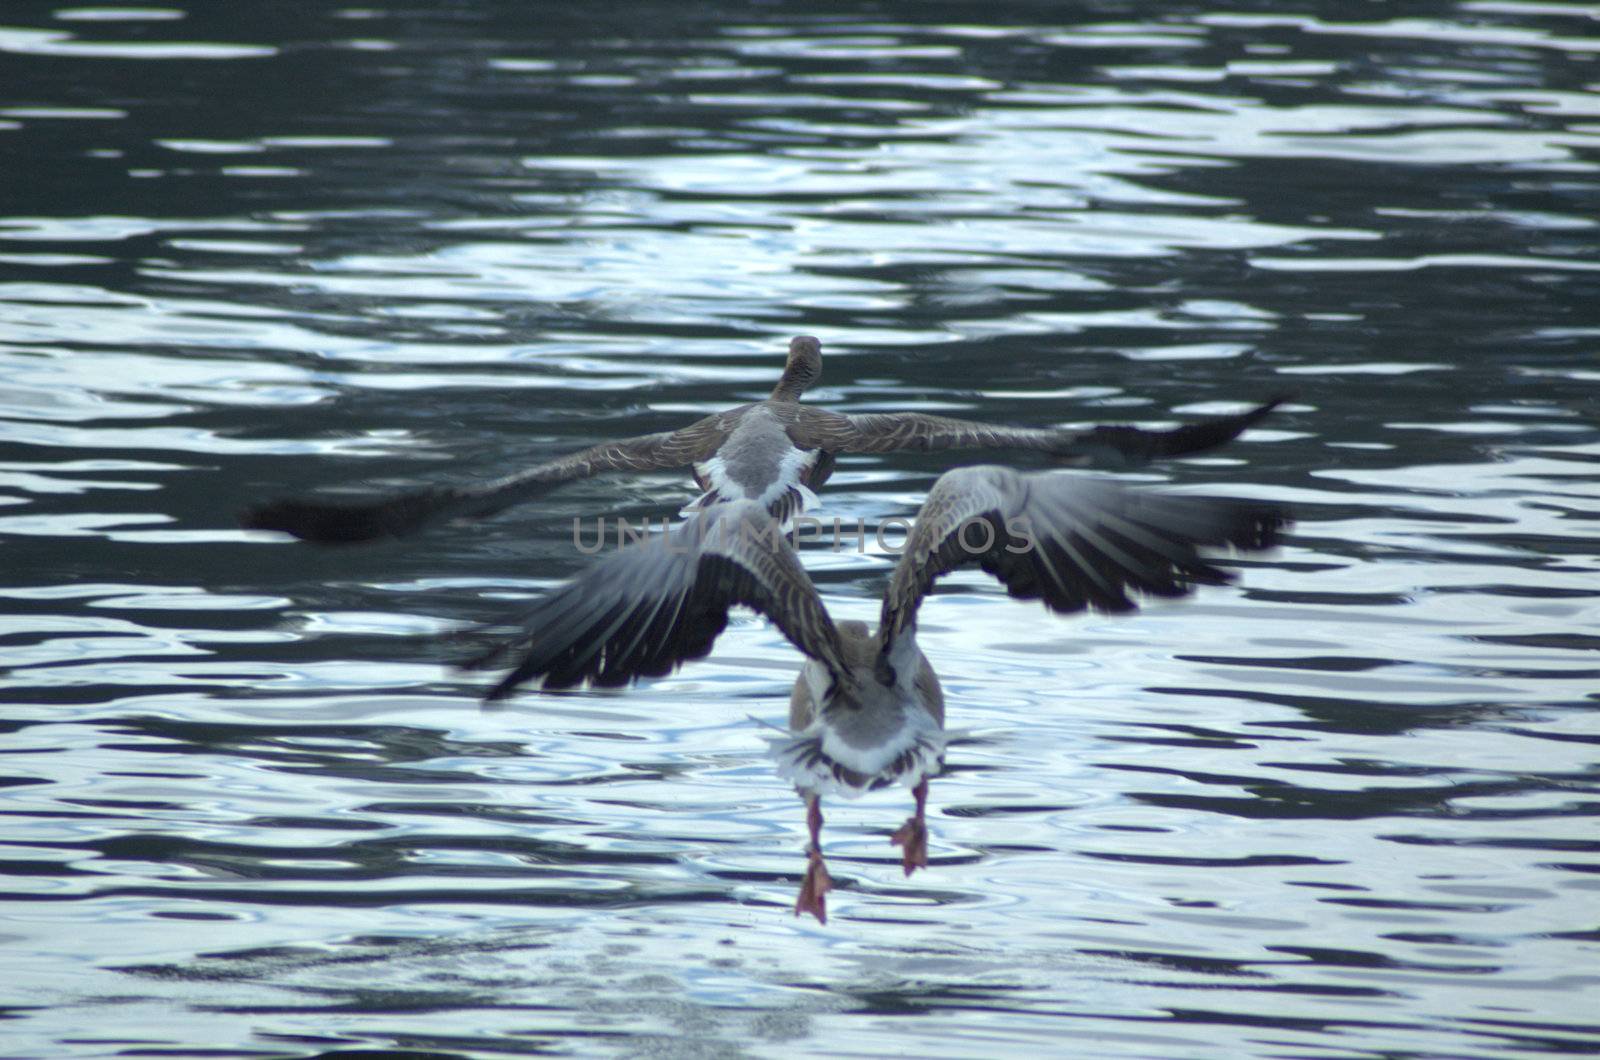 Two geese taking off from the water.